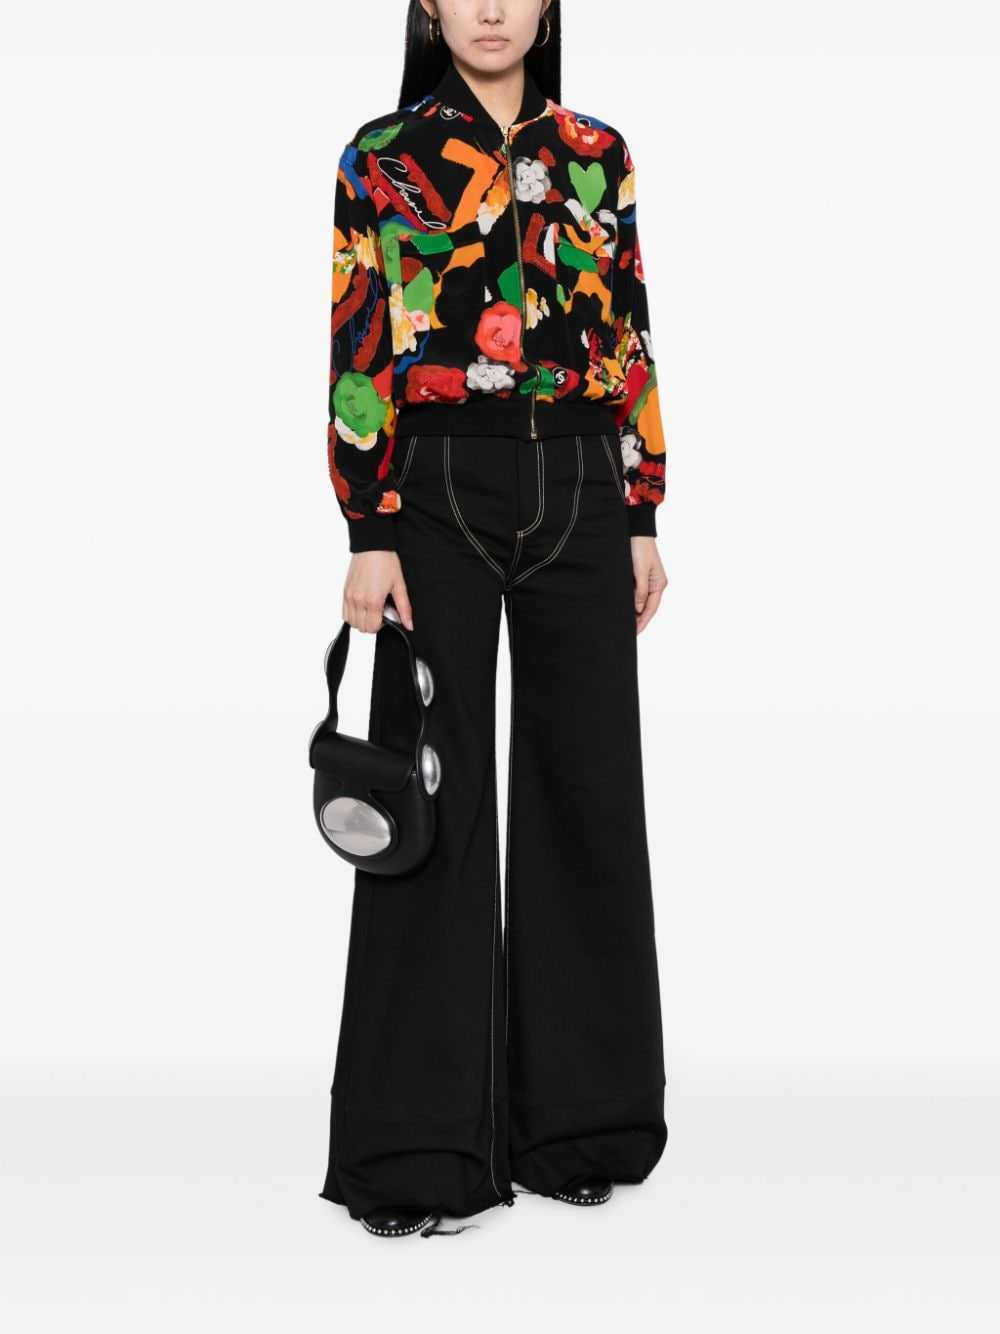 CHANEL Pre-Owned 1992 floral-print silk bomber ja… - image 2